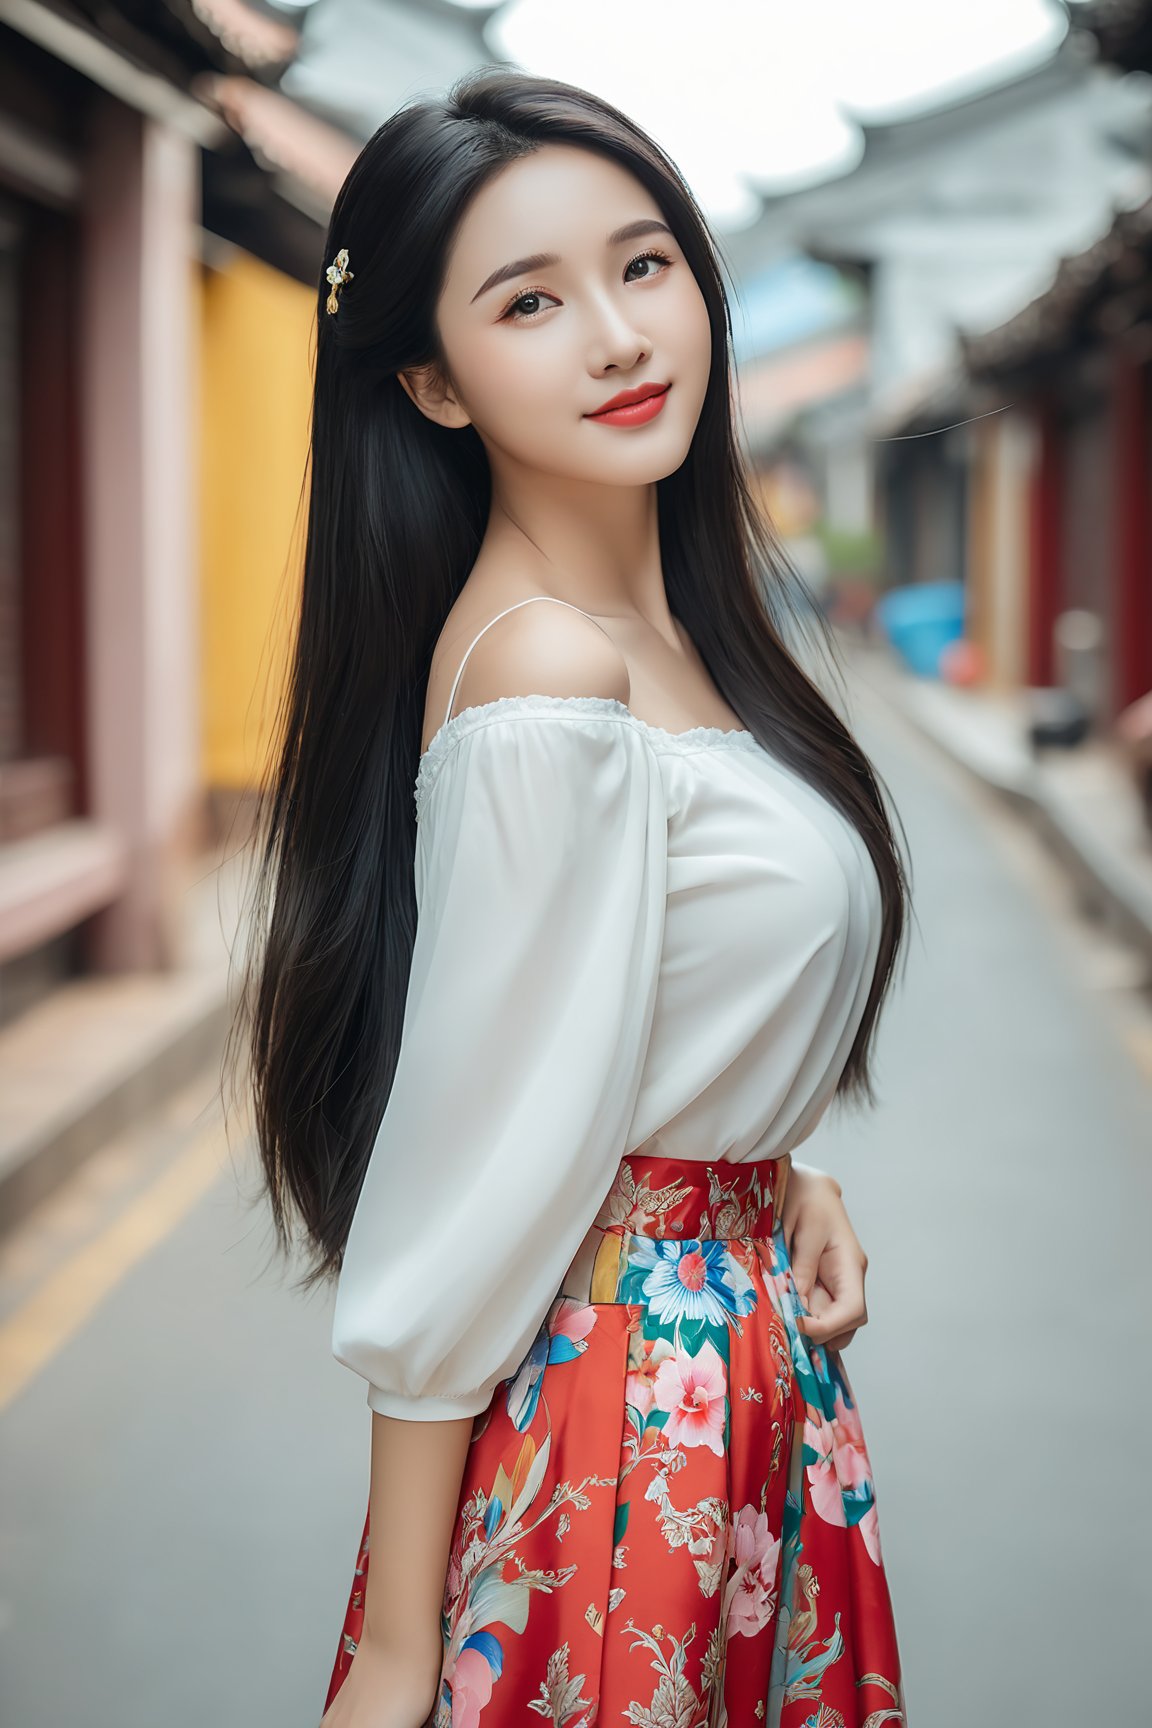 masterpiece,  best quality,  realistic,  photo,  real,  incredibly_absurdres,  Ultra HD, Affectionately looking at you, 8K, UHD, in the vietnamese city street,  full body,  arms behind head, arms behind back,  bust photo, masterpiece,  best quality,  realistic,  photo,  real,  incredibly_absurdres,  Ultra HD, Affectionately looking at you, 8K, UHD, in the vietnamese city street,  full body,  arms behind head, arms behind back,  bust photo, The 20-year-old vietnamese girl, She has black hair,  boho_chic maxi skirt with prints outfit,  The lines of her face are soft and smooth. Her skin is as fair as snow,  soft and delicate,  and her eyes are bright and bright,  deep and mysterious,  making people feel endless charm and appeal. The eyebrows are slender and graceful,  the nose is straight and noble,  the lips are rosy and seductive,  and the slightly raised angle reveals confidence and elegance. Her facial features are delicate and three-dimensional,  with well-defined contours,  like a fine painting or a finely carved work of art. The overall feeling is gentle,  elegant,  noble and full of charm,  huge_filesize,  bust,  girl,  kawaii,  adorable girl,  bishoujo,  ojousama,  idol,  wavy hair,  long hair,  black hair,  beautiful detailed eyes,  looking at viewer,  seductive smile,  black eyes,  large breasts,  arms behind back